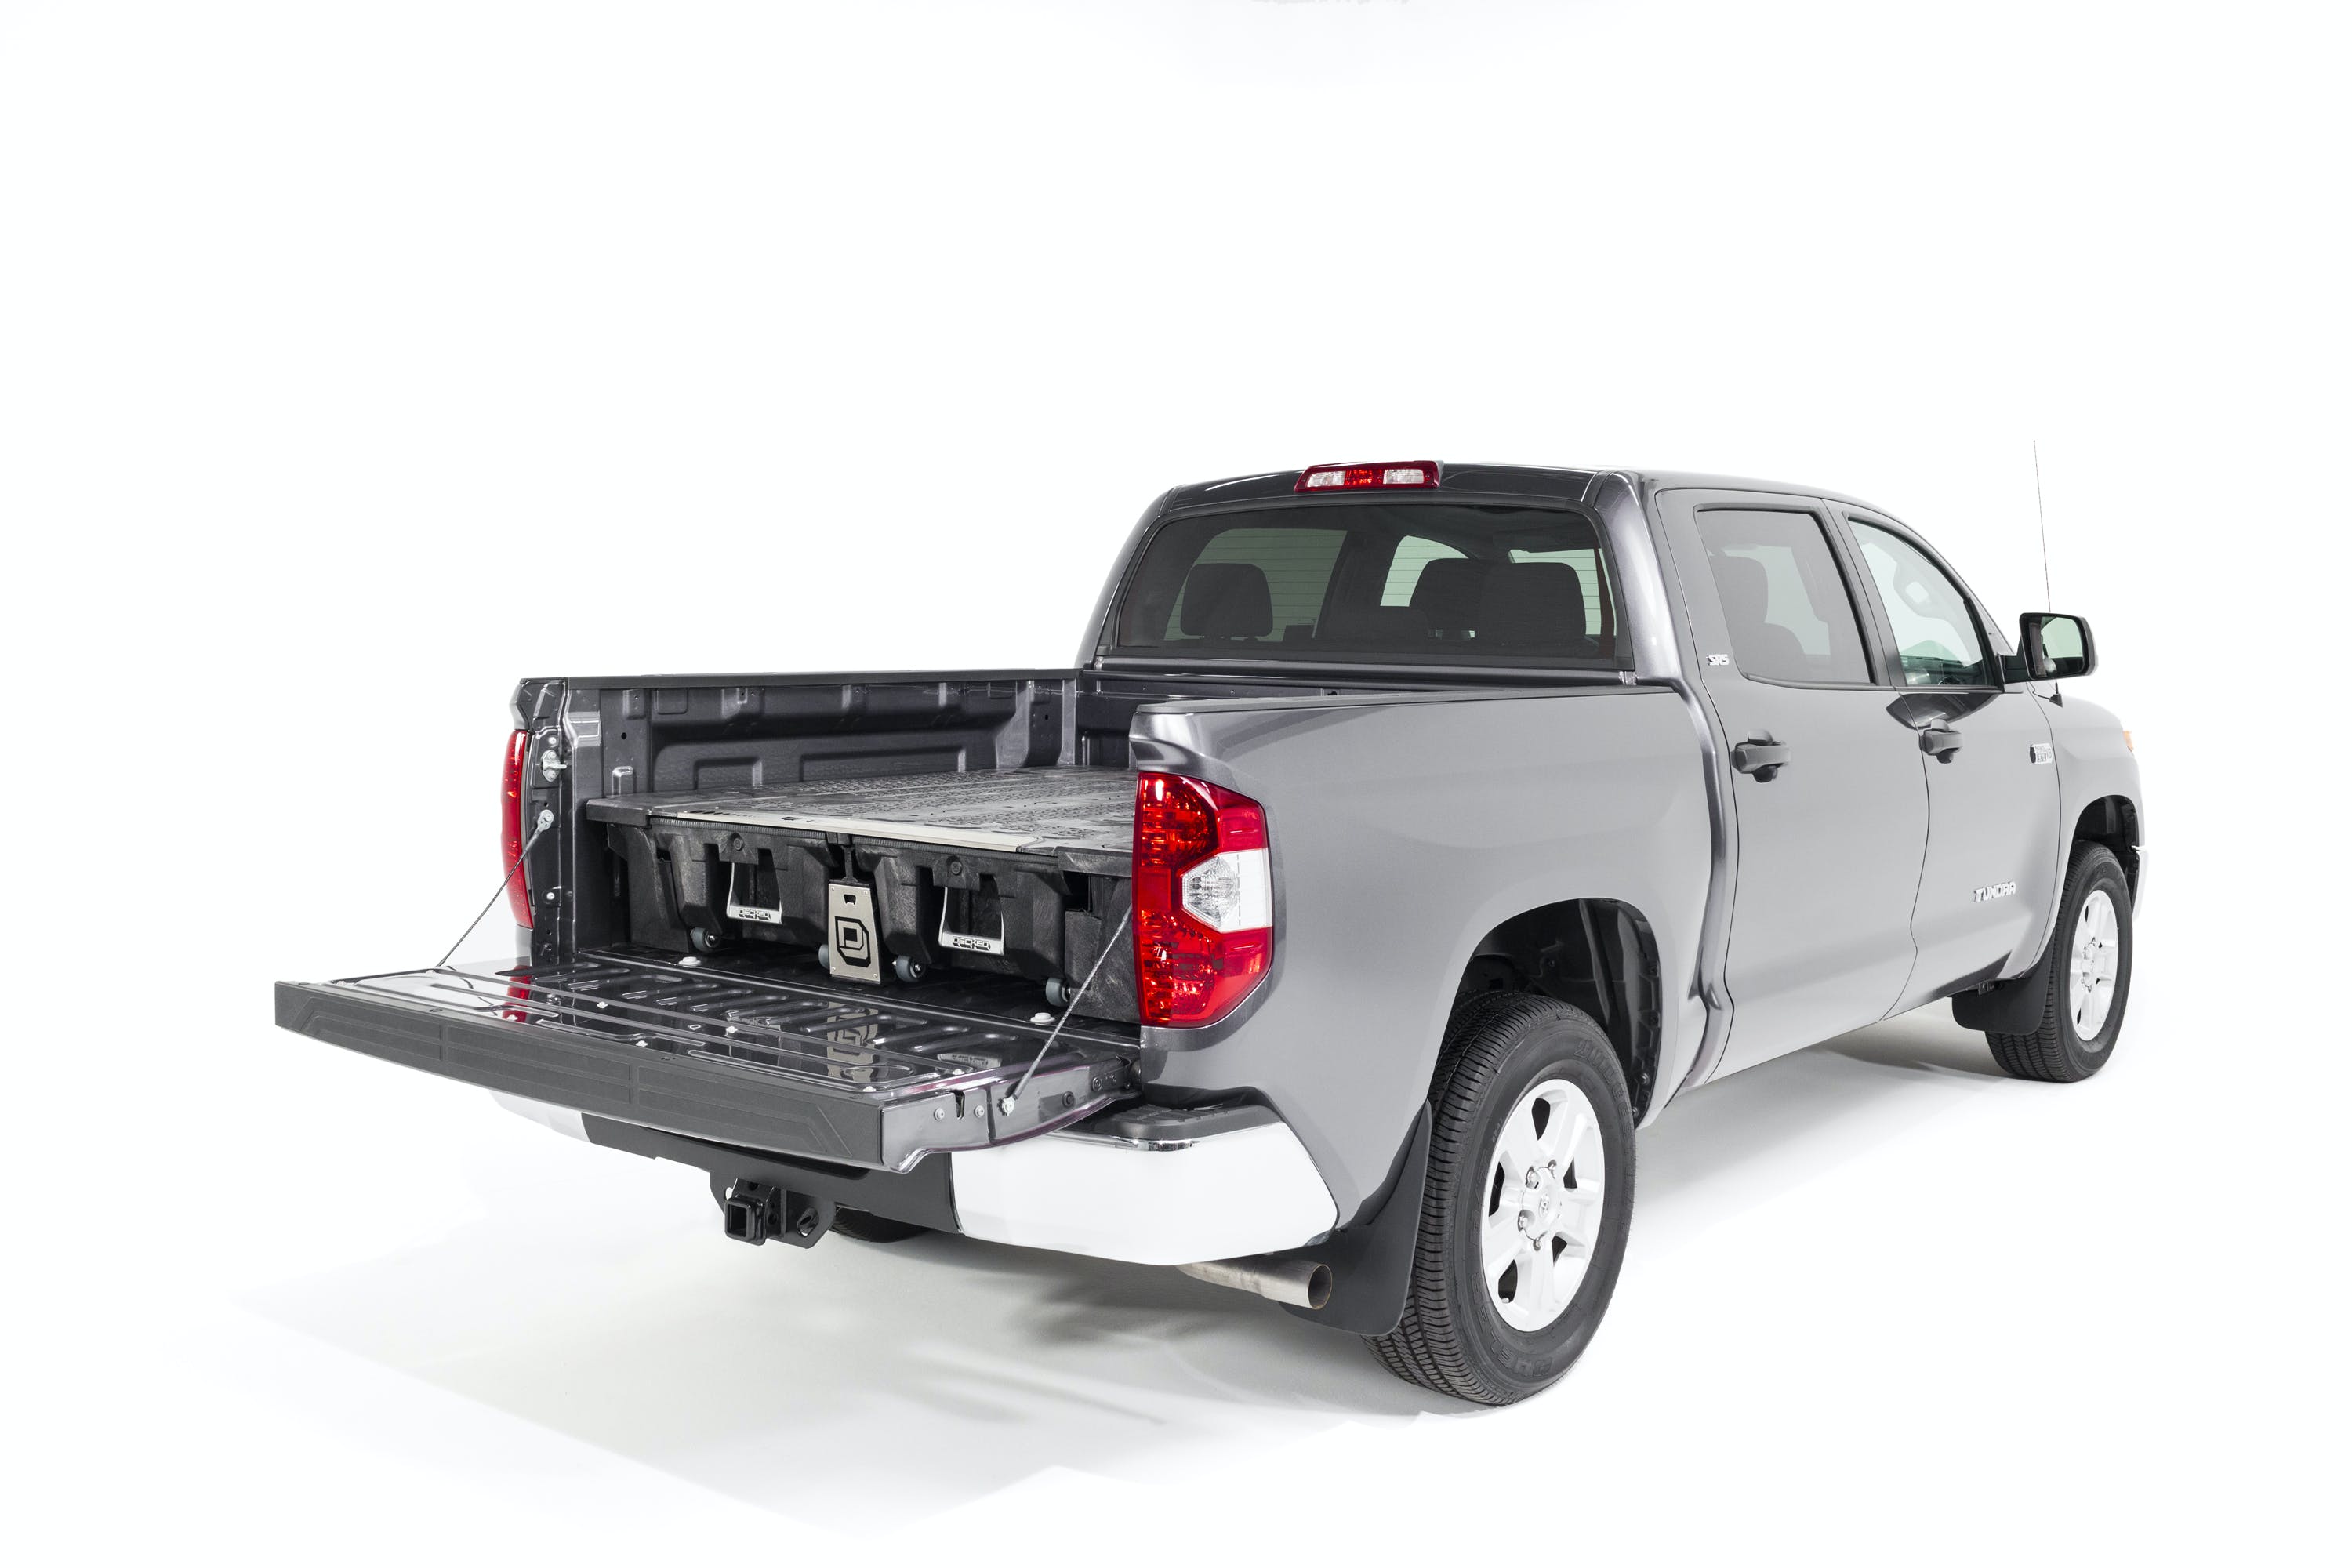 DECKED DT2 75.25 Two Drawer Storage System for A Full Size Pick Up Truck